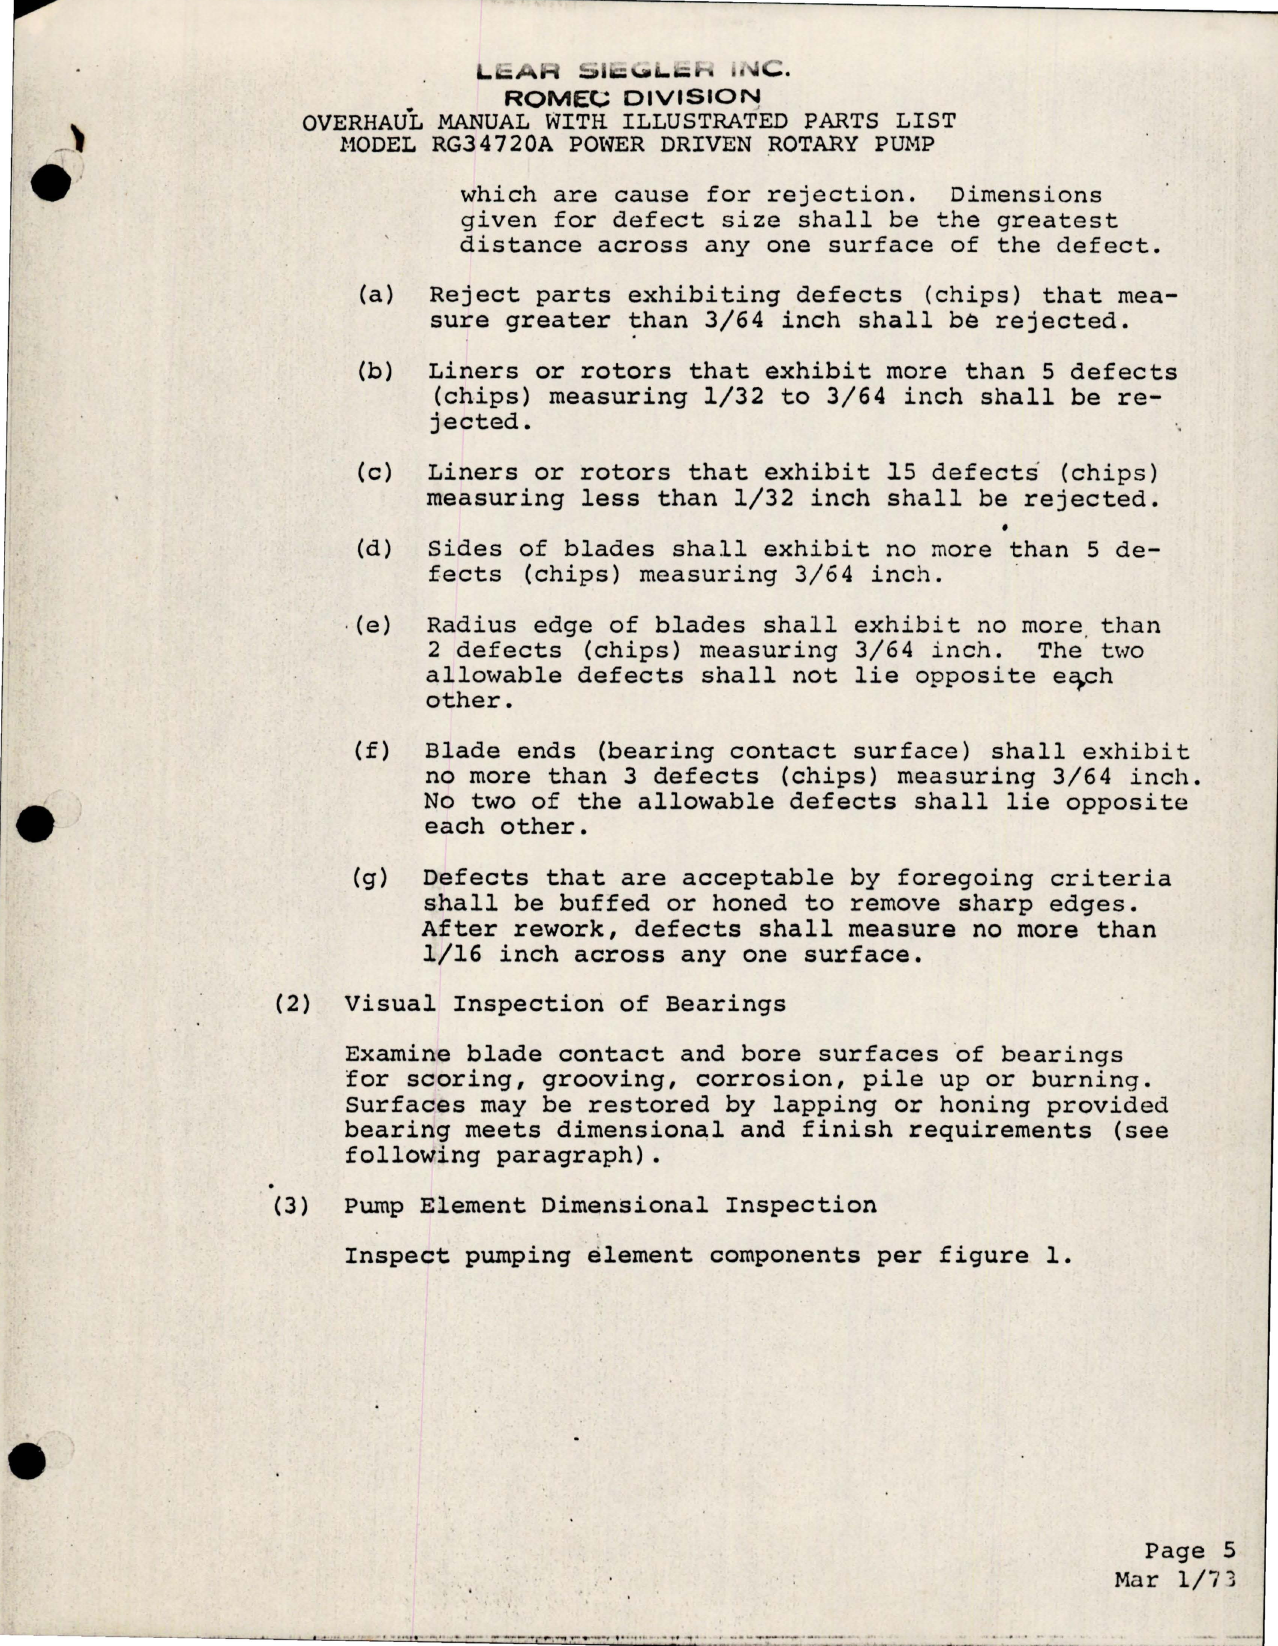 Sample page 7 from AirCorps Library document: Overhaul with Parts List for Power Driven Rotary Pump - Model RG34720A 